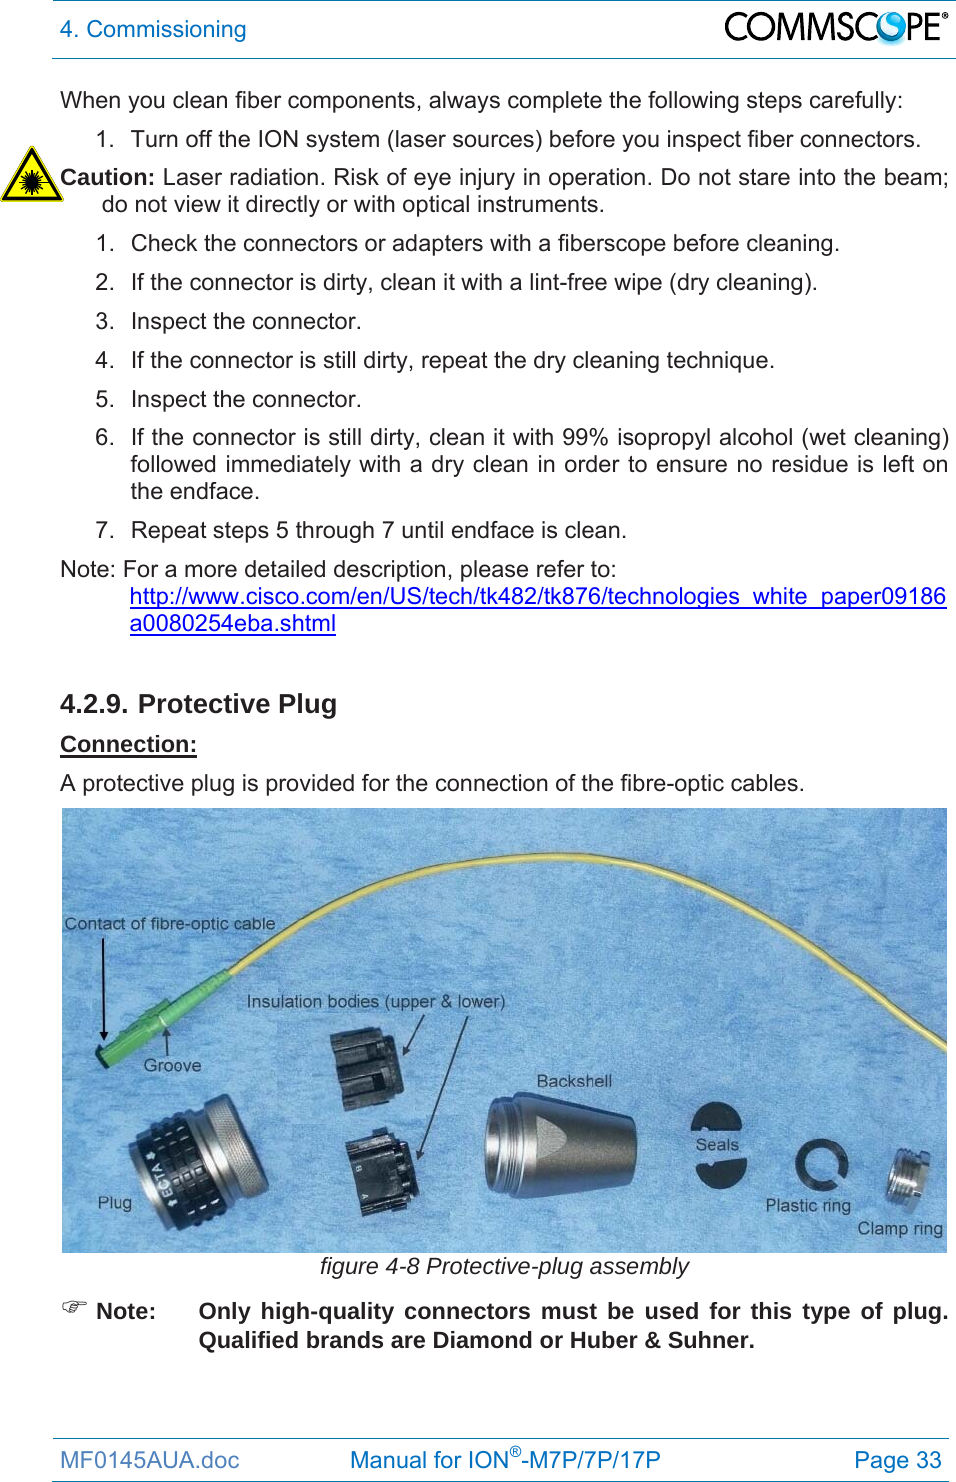 4. Commissioning  MF0145AUA.doc                 Manual for ION®-M7P/7P/17P Page 33 When you clean fiber components, always complete the following steps carefully: 1.  Turn off the ION system (laser sources) before you inspect fiber connectors. Caution: Laser radiation. Risk of eye injury in operation. Do not stare into the beam; do not view it directly or with optical instruments. 1.  Check the connectors or adapters with a fiberscope before cleaning. 2.  If the connector is dirty, clean it with a lint-free wipe (dry cleaning). 3. Inspect the connector. 4.  If the connector is still dirty, repeat the dry cleaning technique. 5. Inspect the connector. 6.  If the connector is still dirty, clean it with 99% isopropyl alcohol (wet cleaning) followed immediately with a dry clean in order to ensure no residue is left on the endface. 7.  Repeat steps 5 through 7 until endface is clean. Note: For a more detailed description, please refer to:  http://www.cisco.com/en/US/tech/tk482/tk876/technologies_white_paper09186a0080254eba.shtml  4.2.9. Protective Plug Connection: A protective plug is provided for the connection of the fibre-optic cables.  figure 4-8 Protective-plug assembly  Note:  Only high-quality connectors must be used for this type of plug. Qualified brands are Diamond or Huber &amp; Suhner. 